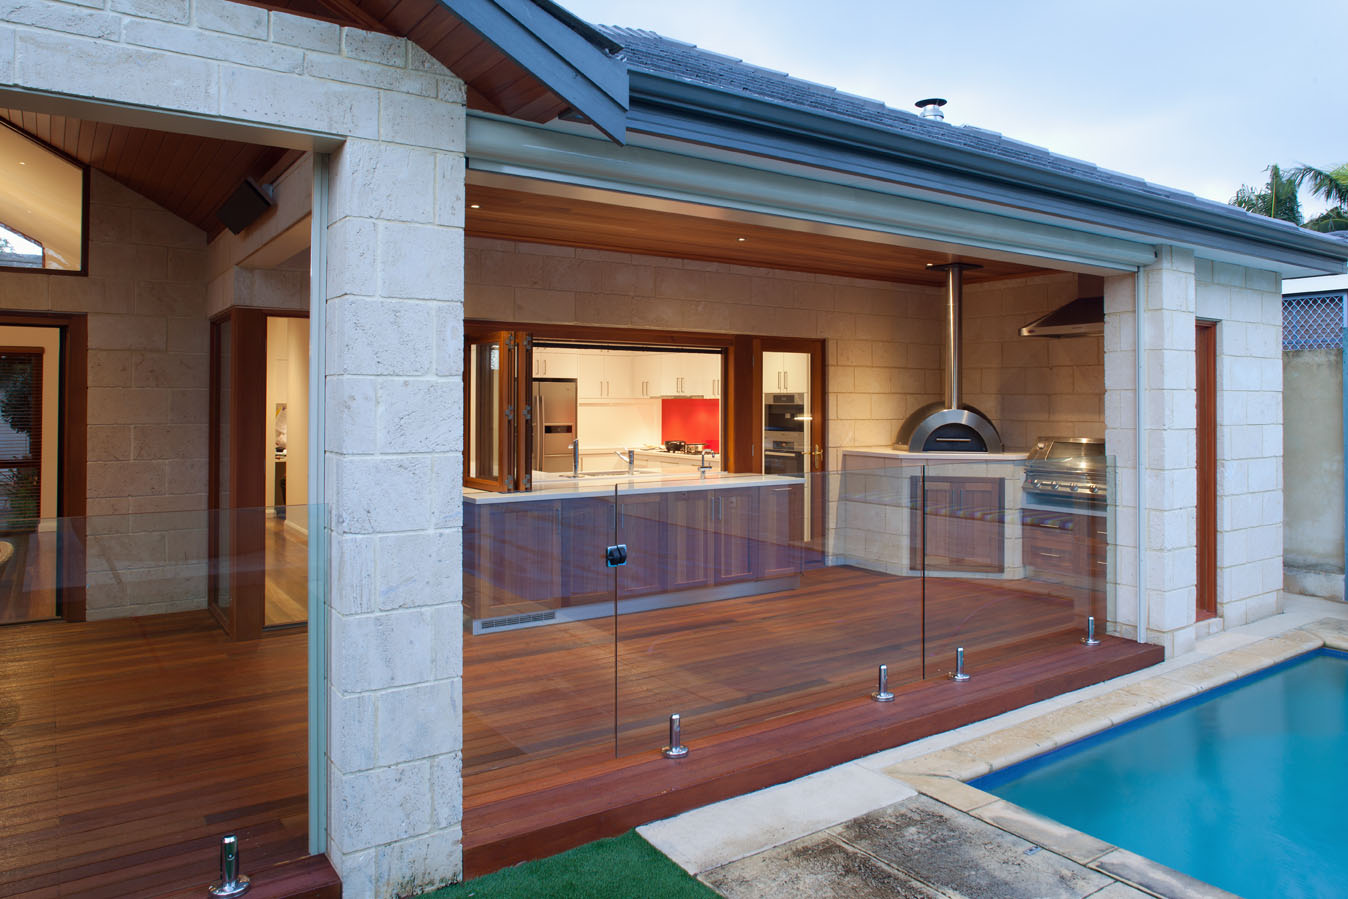 Decking Floor Pool Fancy Decking Floor And Glass Pool Fence Feat Ultra Modern Outdoor Kitchen With Island Table Idea Kitchen Outdoor Kitchen Design For A Wonderful Patio